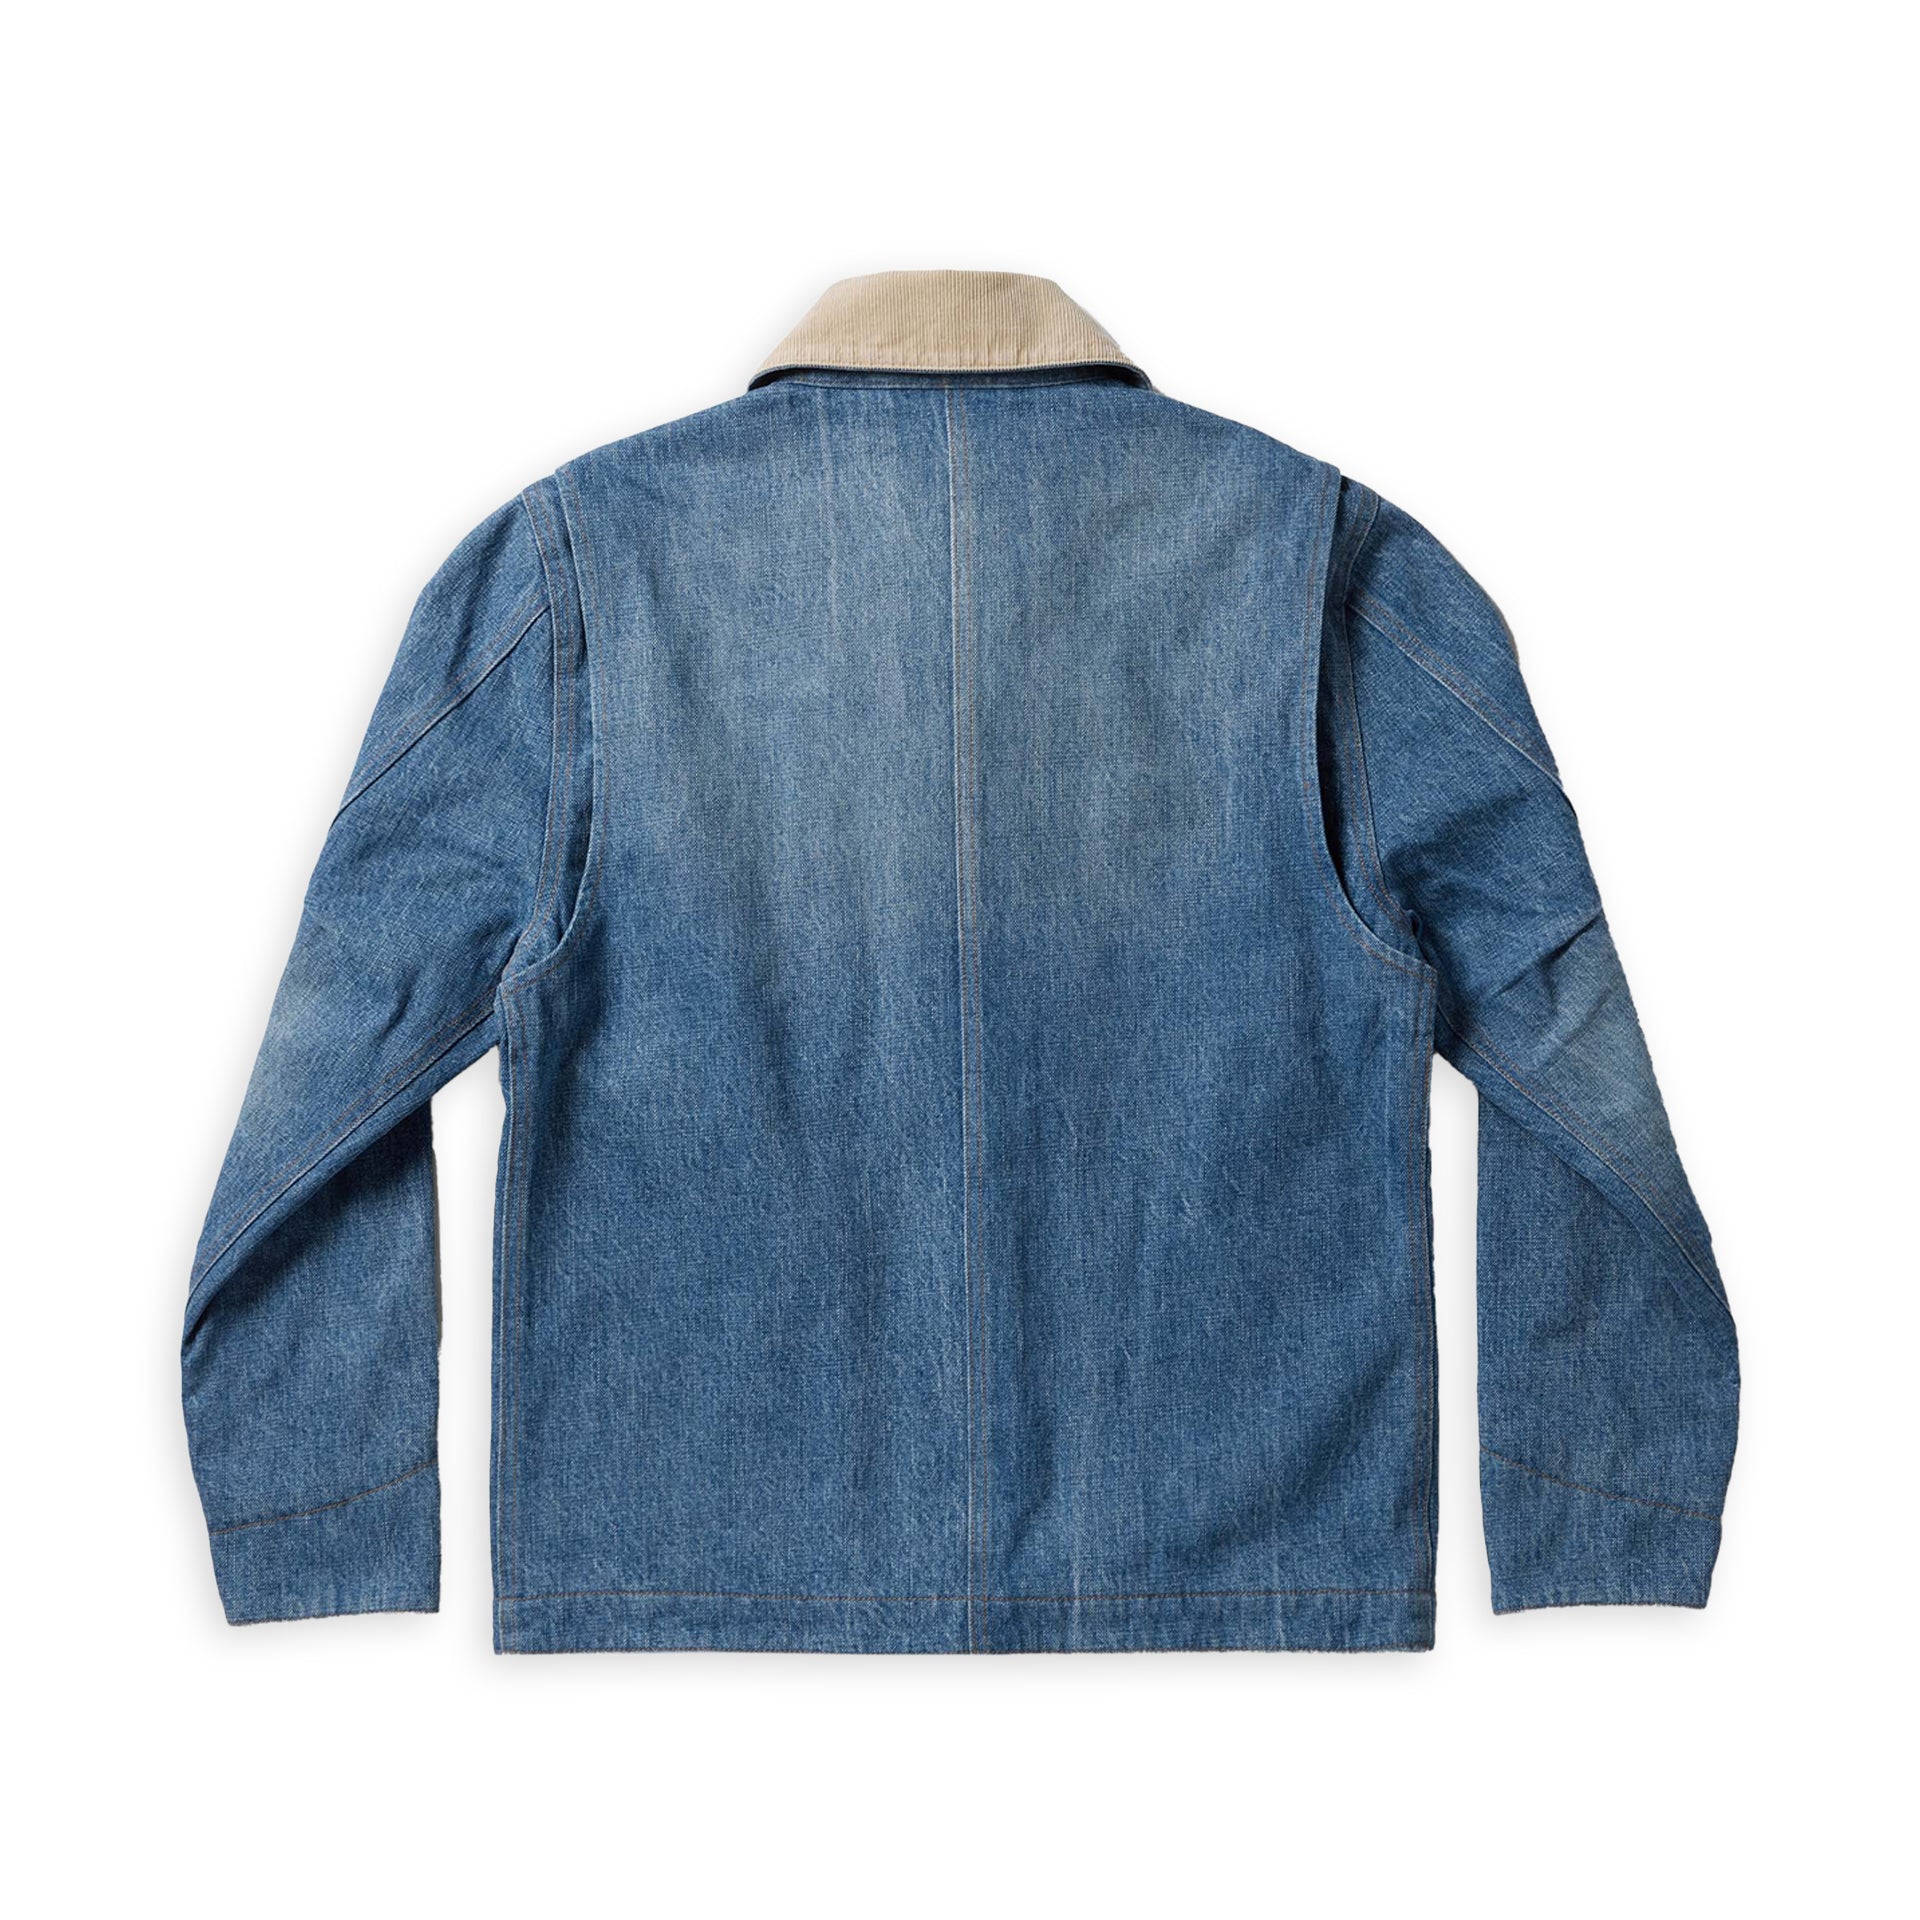 Taylor Workhorse | Stitch Selvage Supply Jacket Uncrate